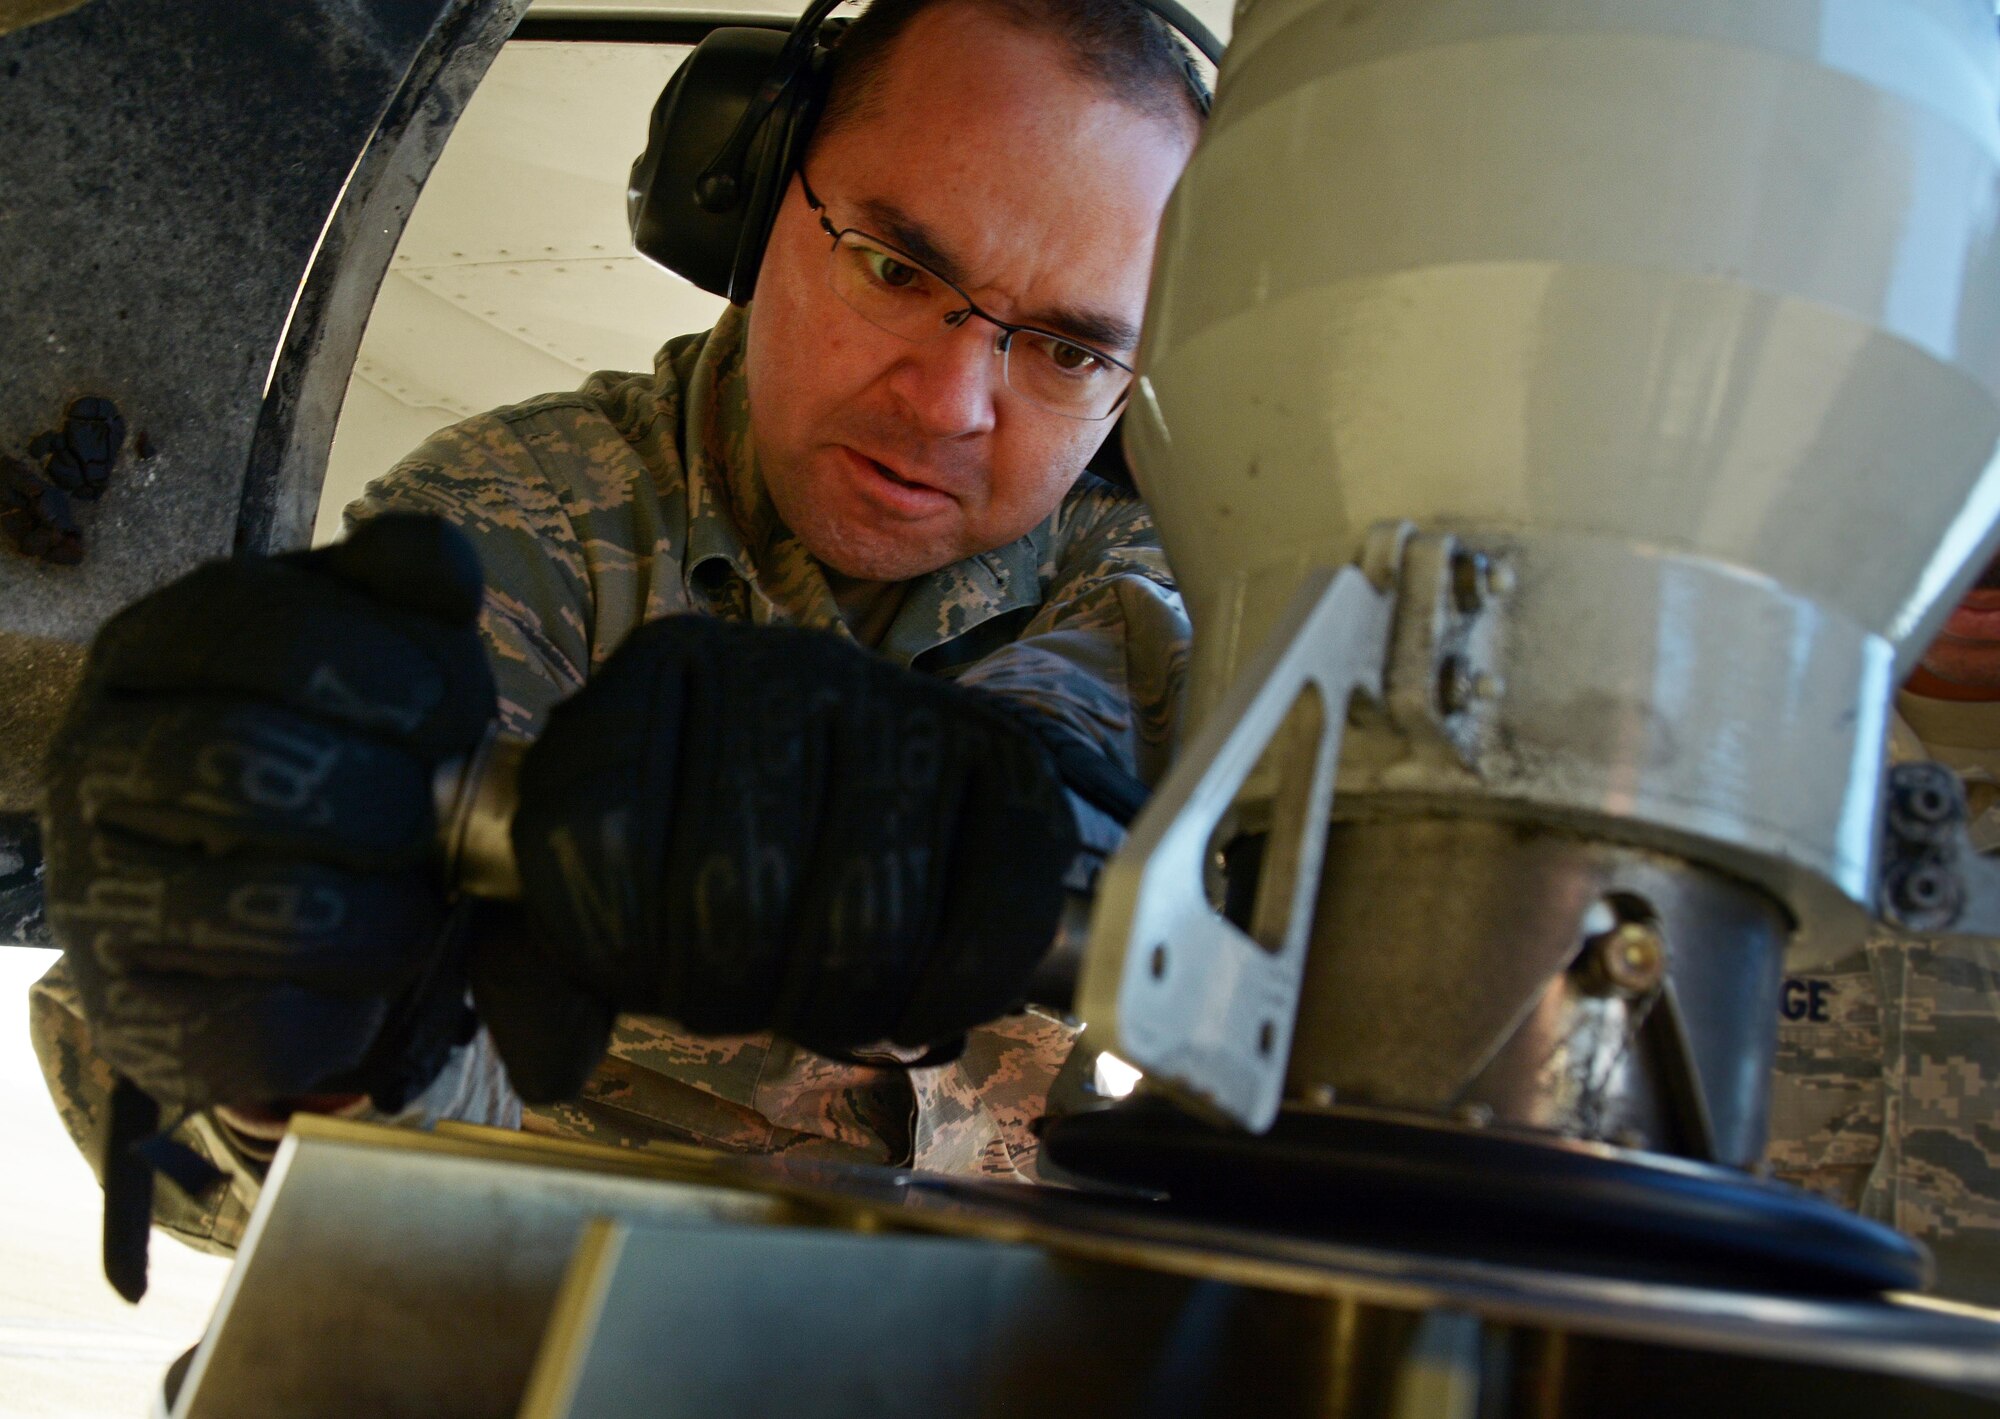 Senior Airman Brandon Mayfield, 945th Aircraft Maintenance Squadron crew chief, works on a stabilizer strut for a C-17 Globemaster III prior to its take off from Travis Air Force Base, Calif., for Patriot Wyvern on Feb. 11, 2017. Patriot Wyvern is a hands-on, bi-annual event conducted by the 349th Air Mobility Wing designed to hone combat skills and improve organizational interoperability. (U.S. Air Force photo/Staff Sgt. Daniel Phelps)